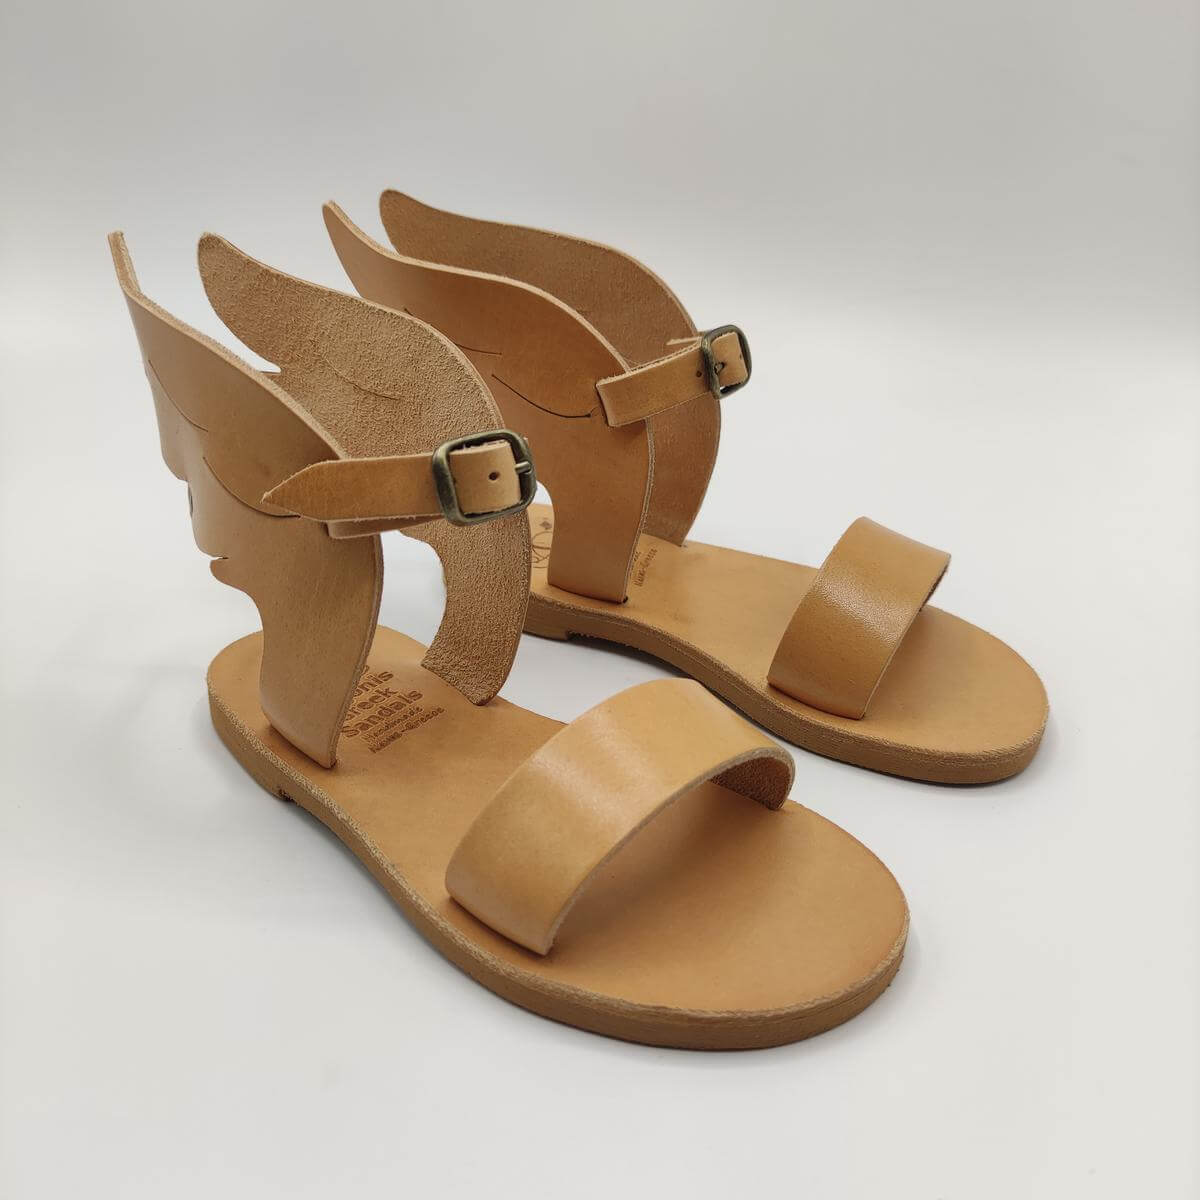 Kids Sandals With Wings Without Toe Strap Natural